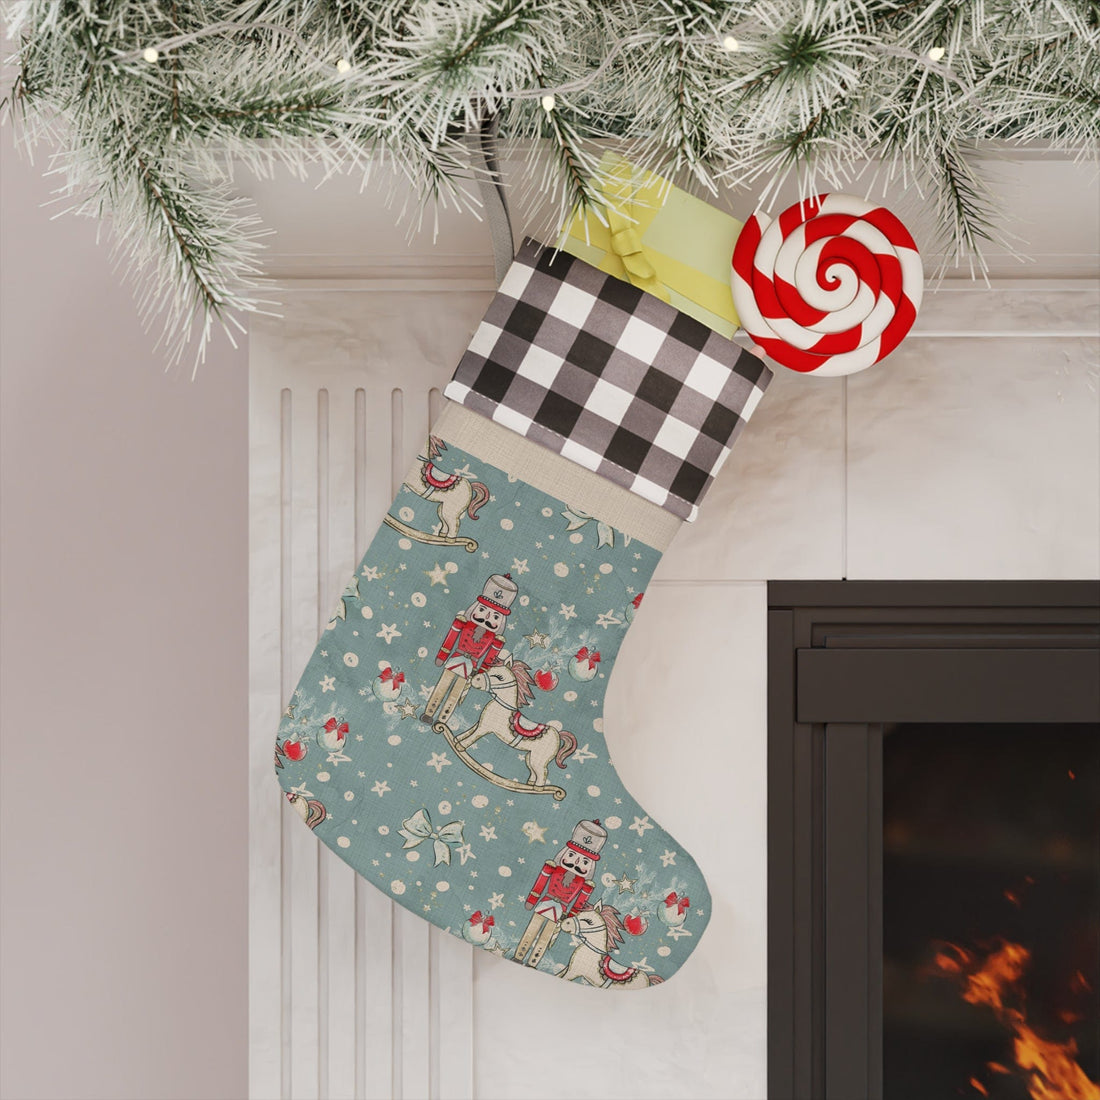 Printify Festive Nutcracker Christmas Stocking: Plaid Top, Burlap Linen Boot, Spacious - Perfect Holiday Decor, Gift for Kids Home Decor One size / White and Black/Natural 95850411104450938823